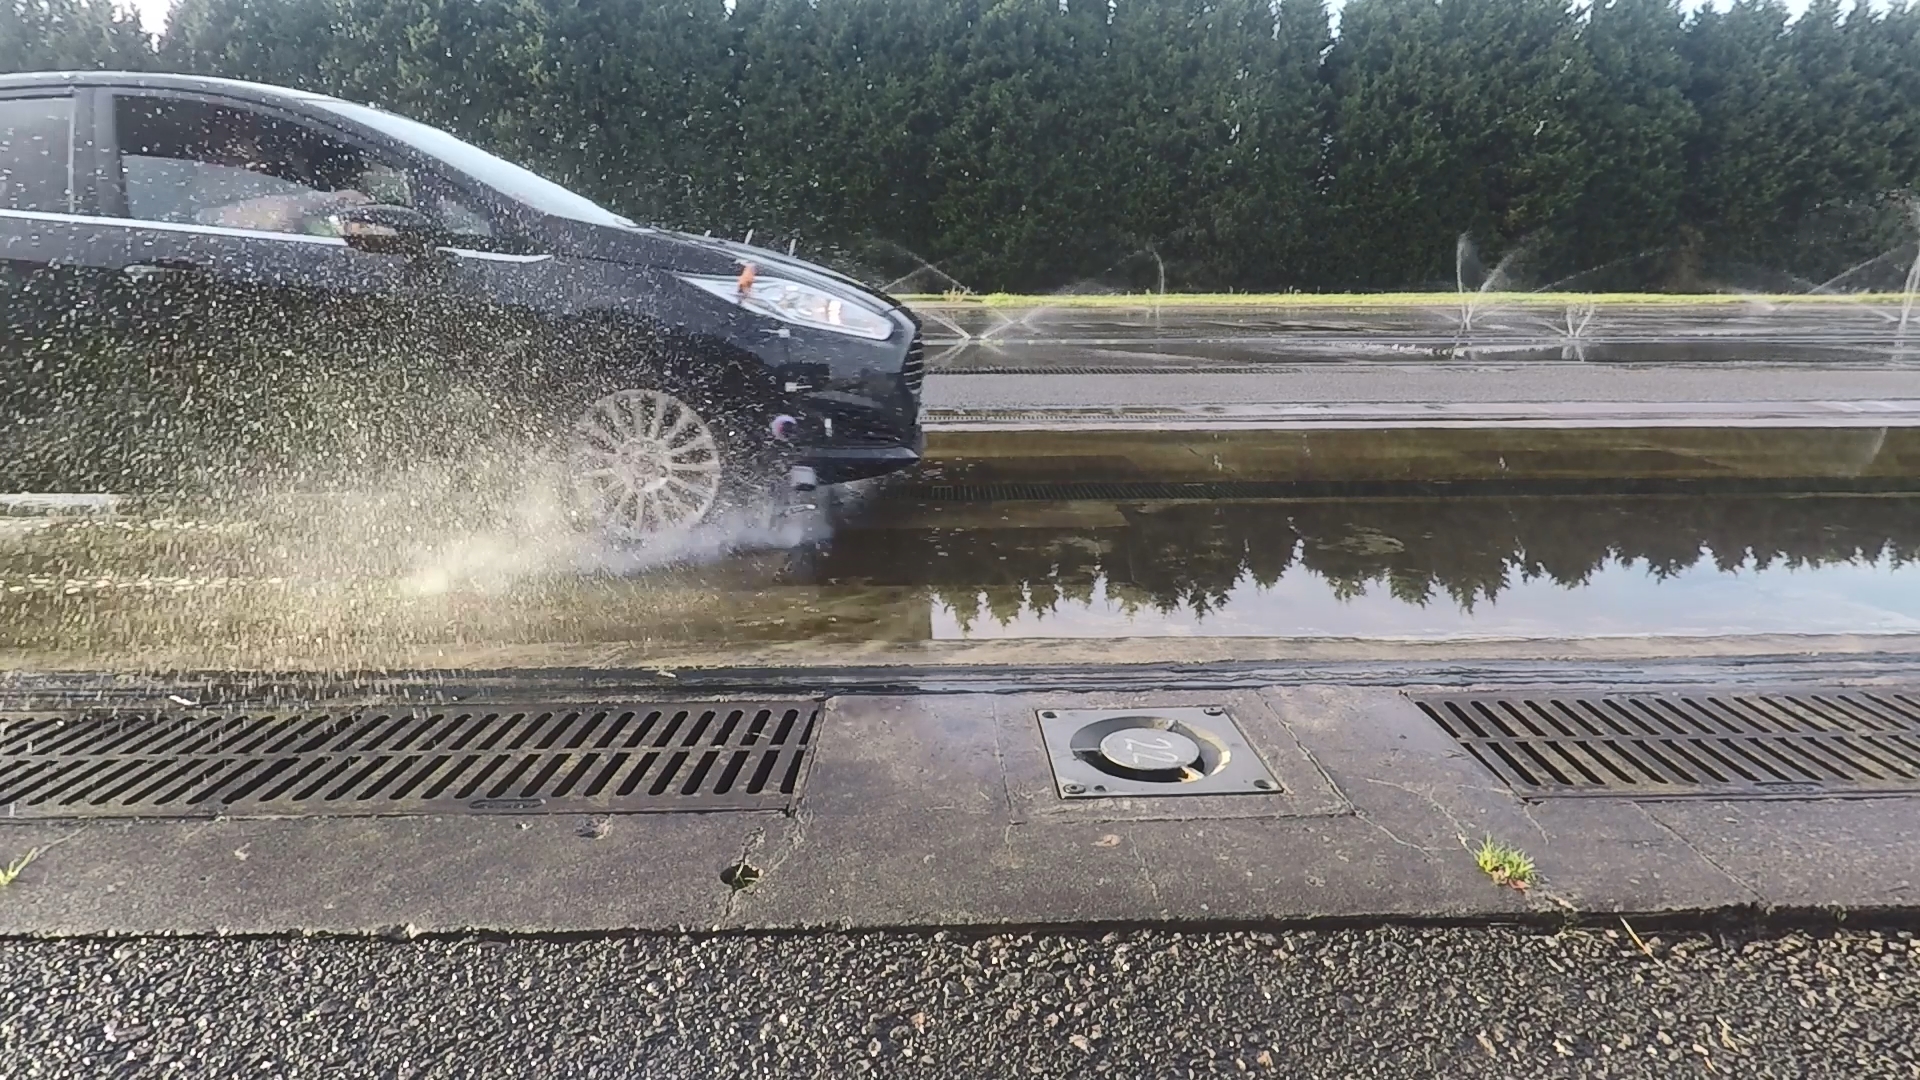 RDTS safety device from Coventry University blasts water away from car tyres as you drive to provide grip in wet weather